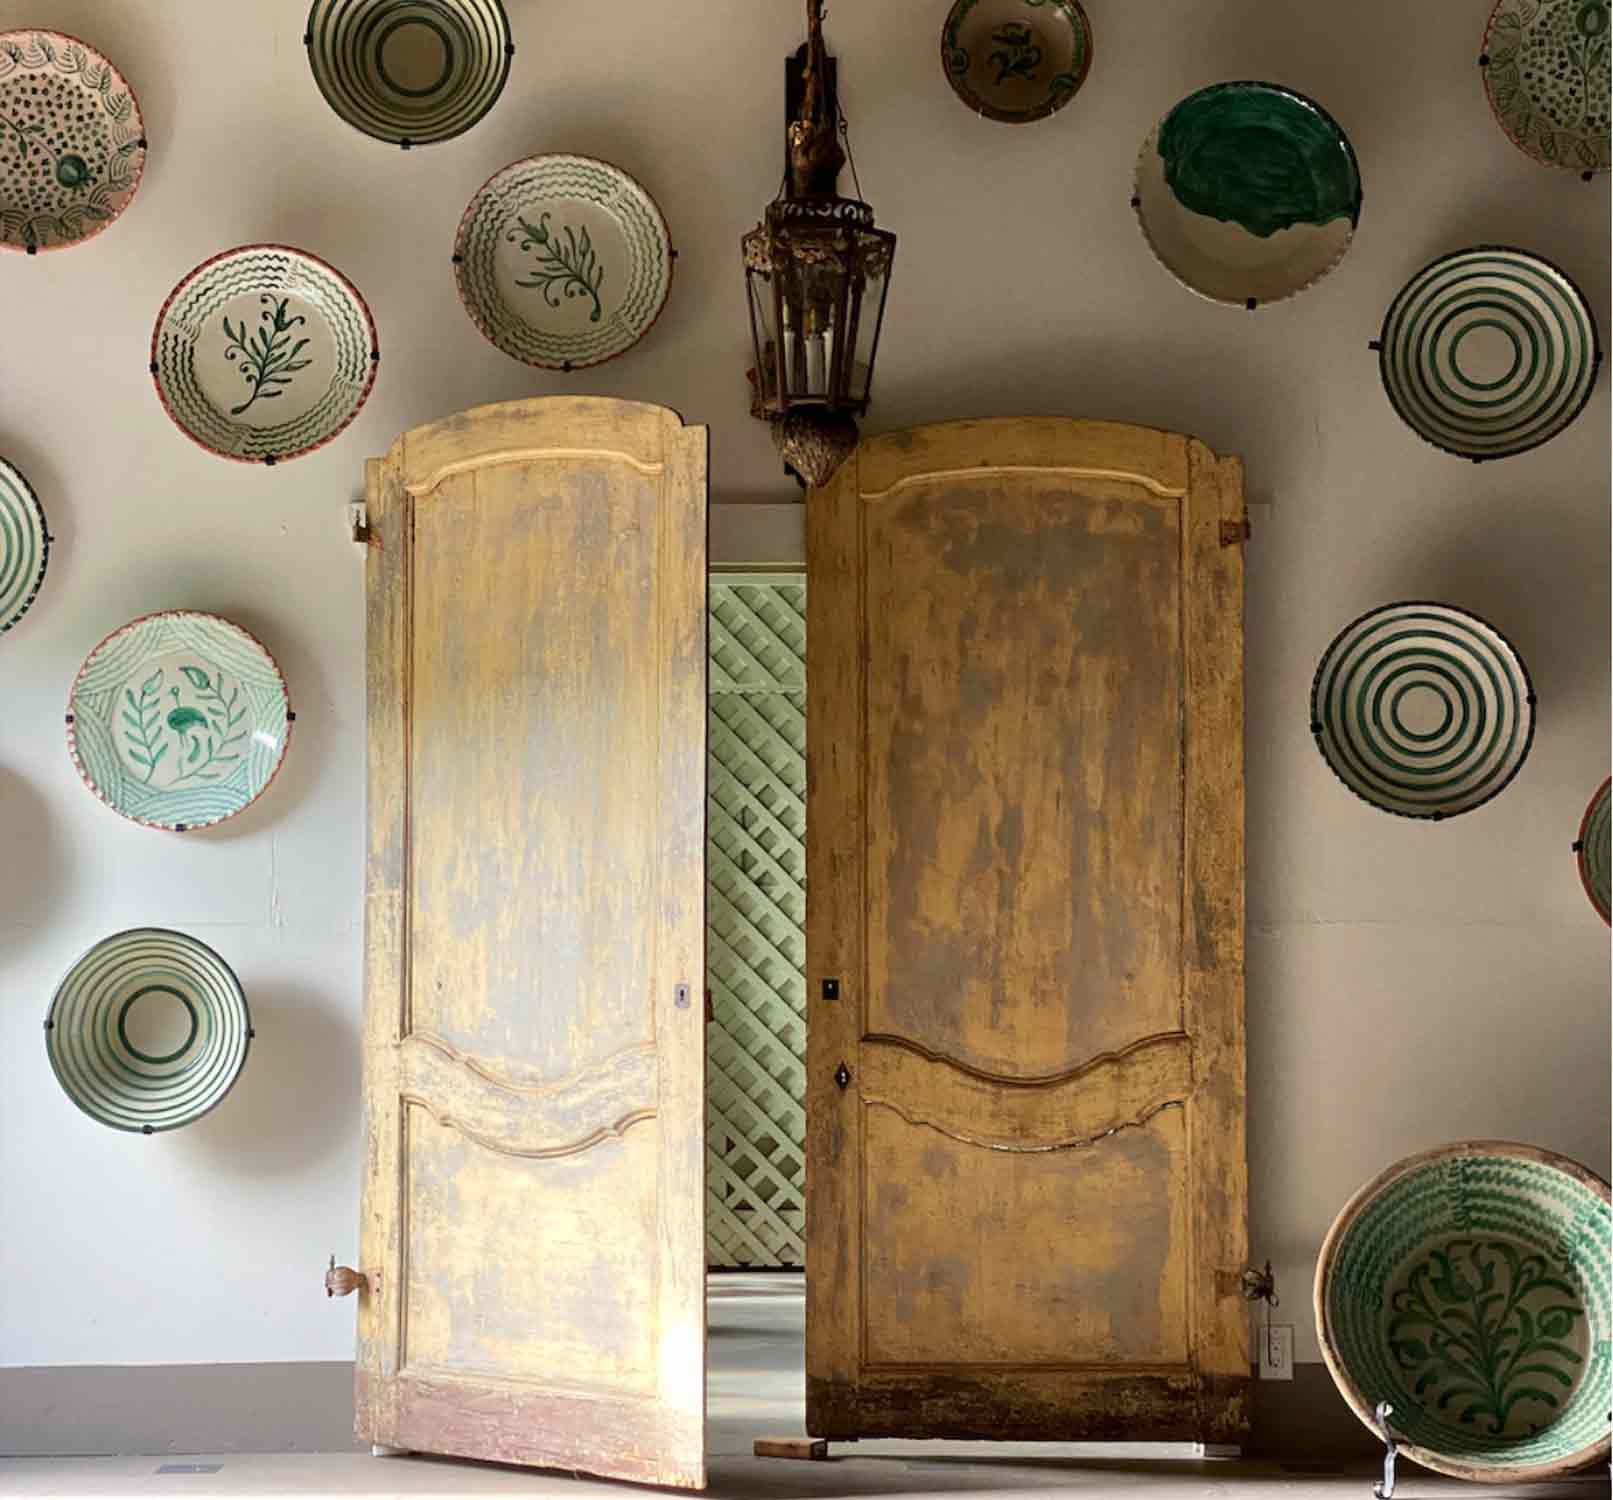 Casa Gusto Palm Beach antique doors and pottery